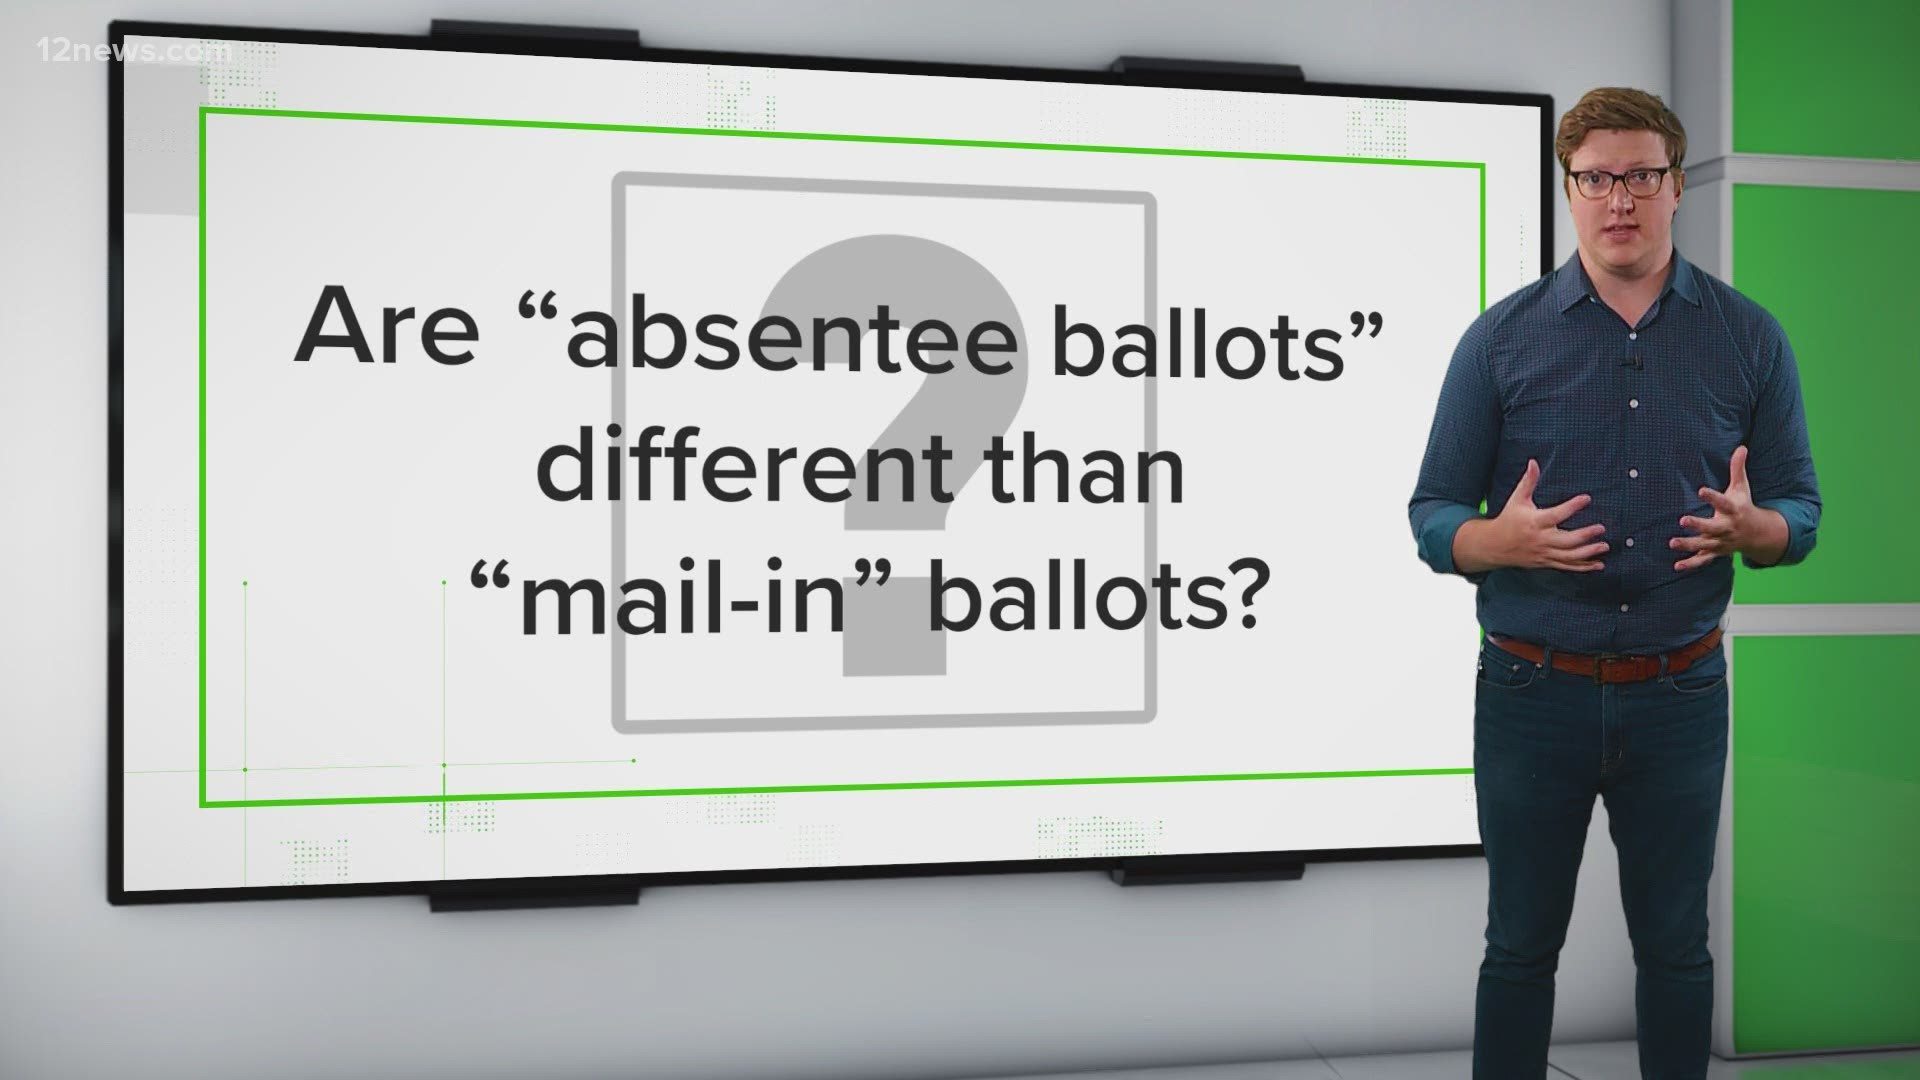 There's been a lot of debate and contradicting claims about mail-in ballots and absentee ballots. Our Verify team looks into the differences.